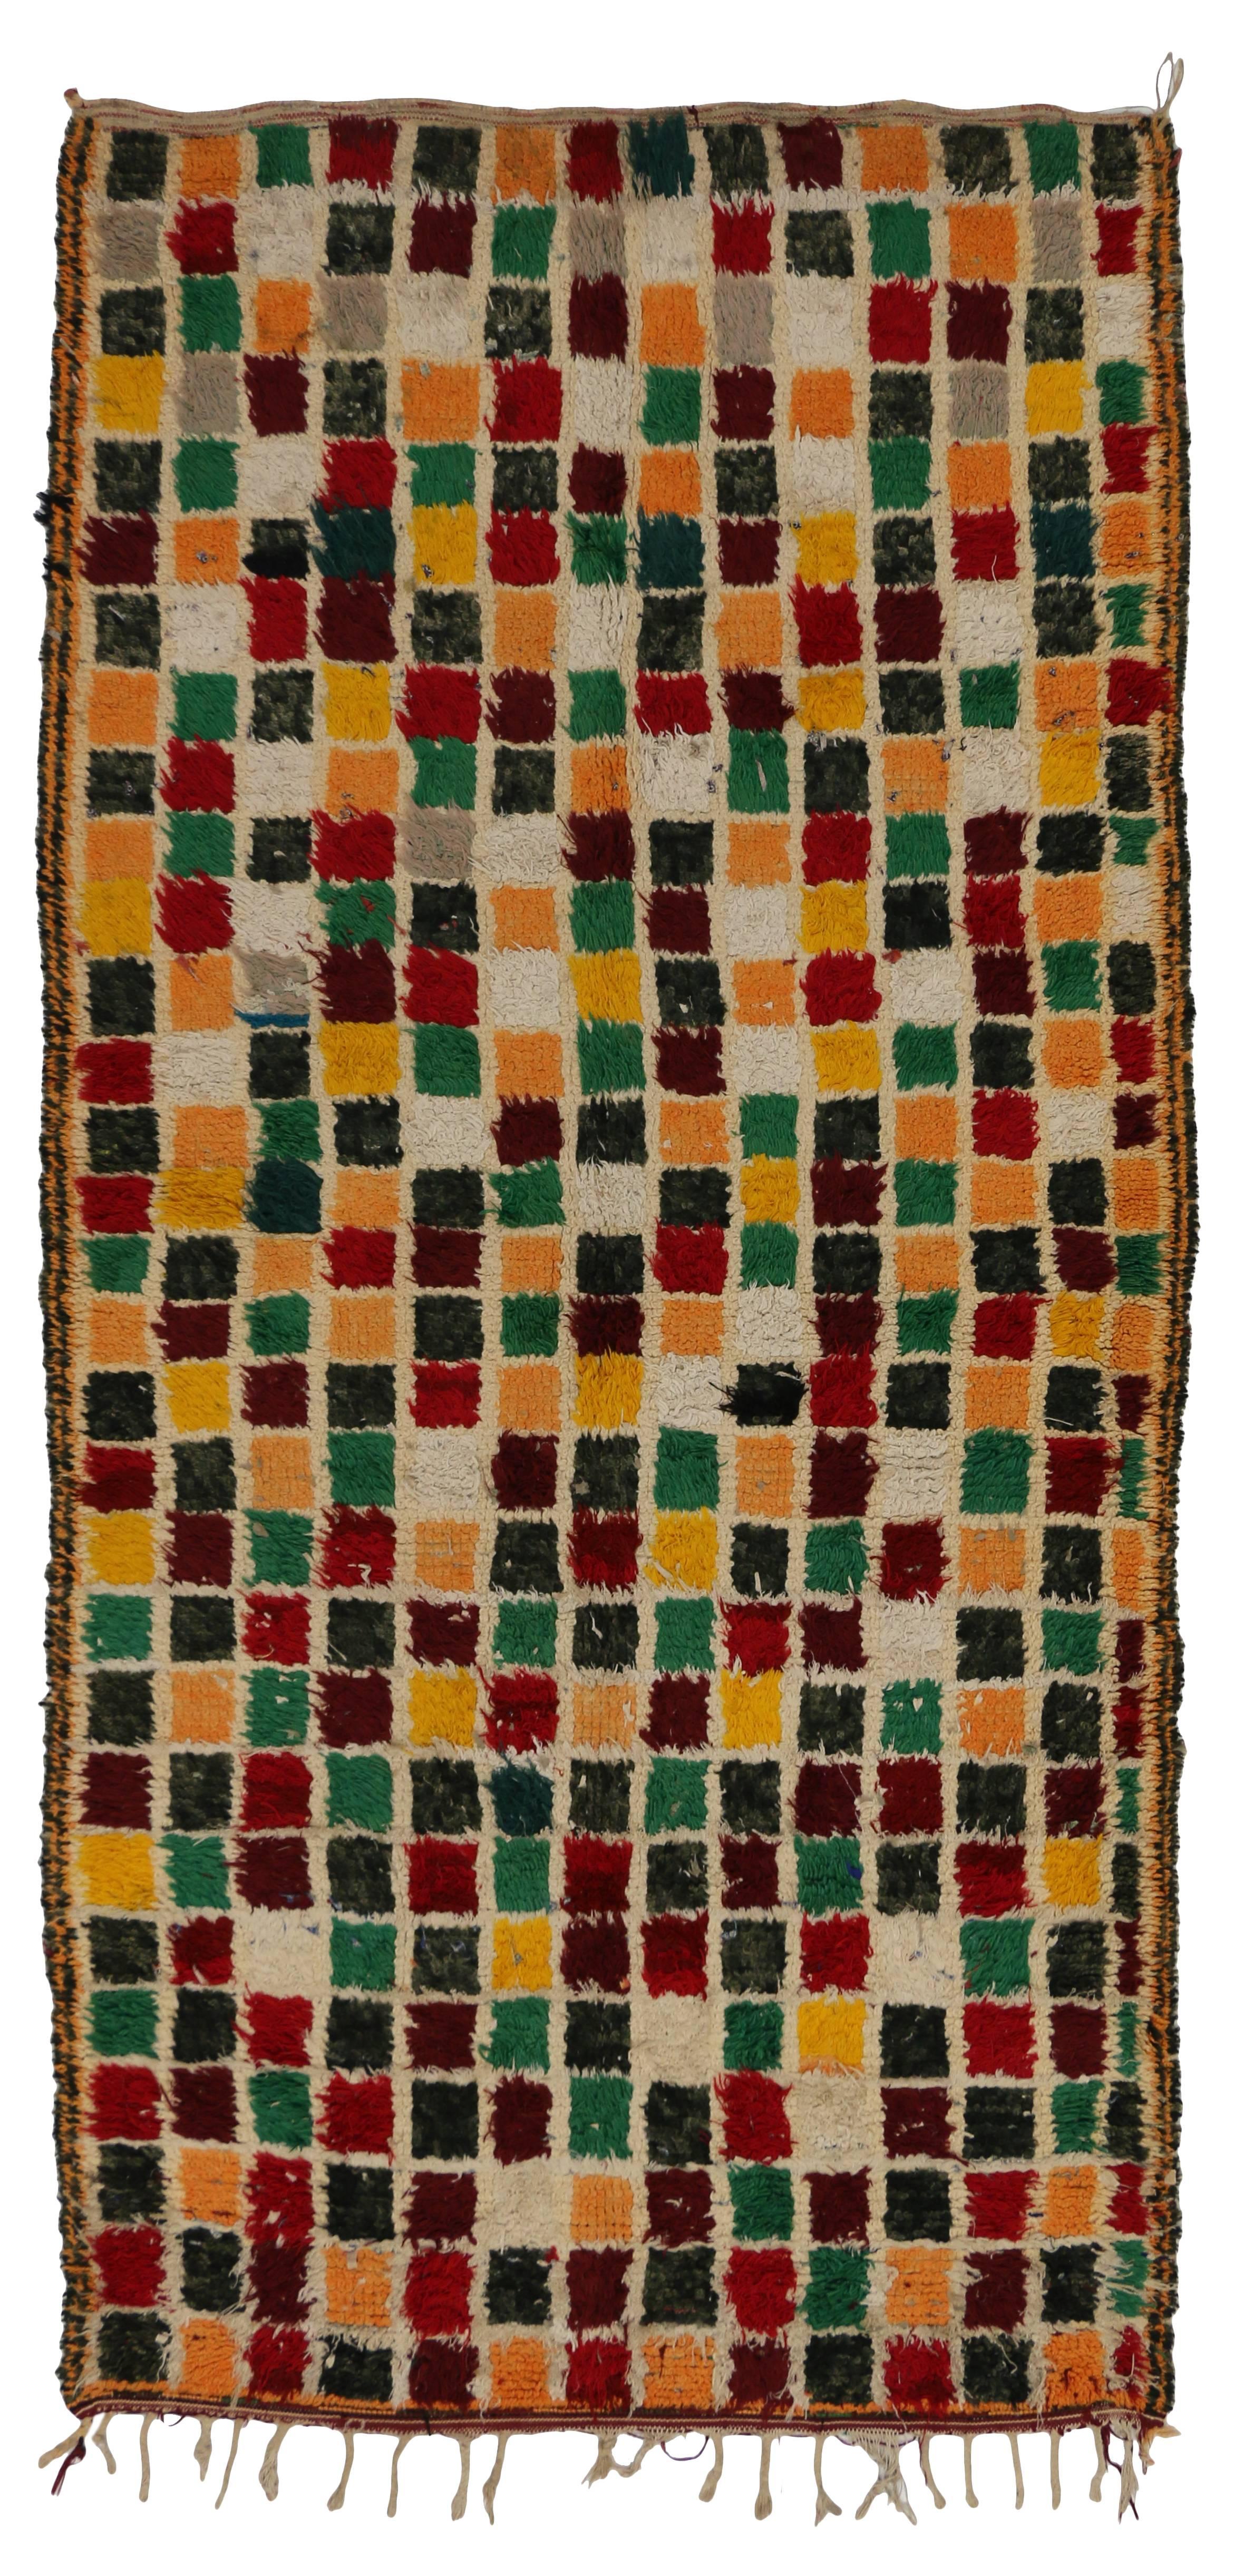 20th Century Vintage Berber Moroccan Runner with Postmodern Bauhaus Cubism Style